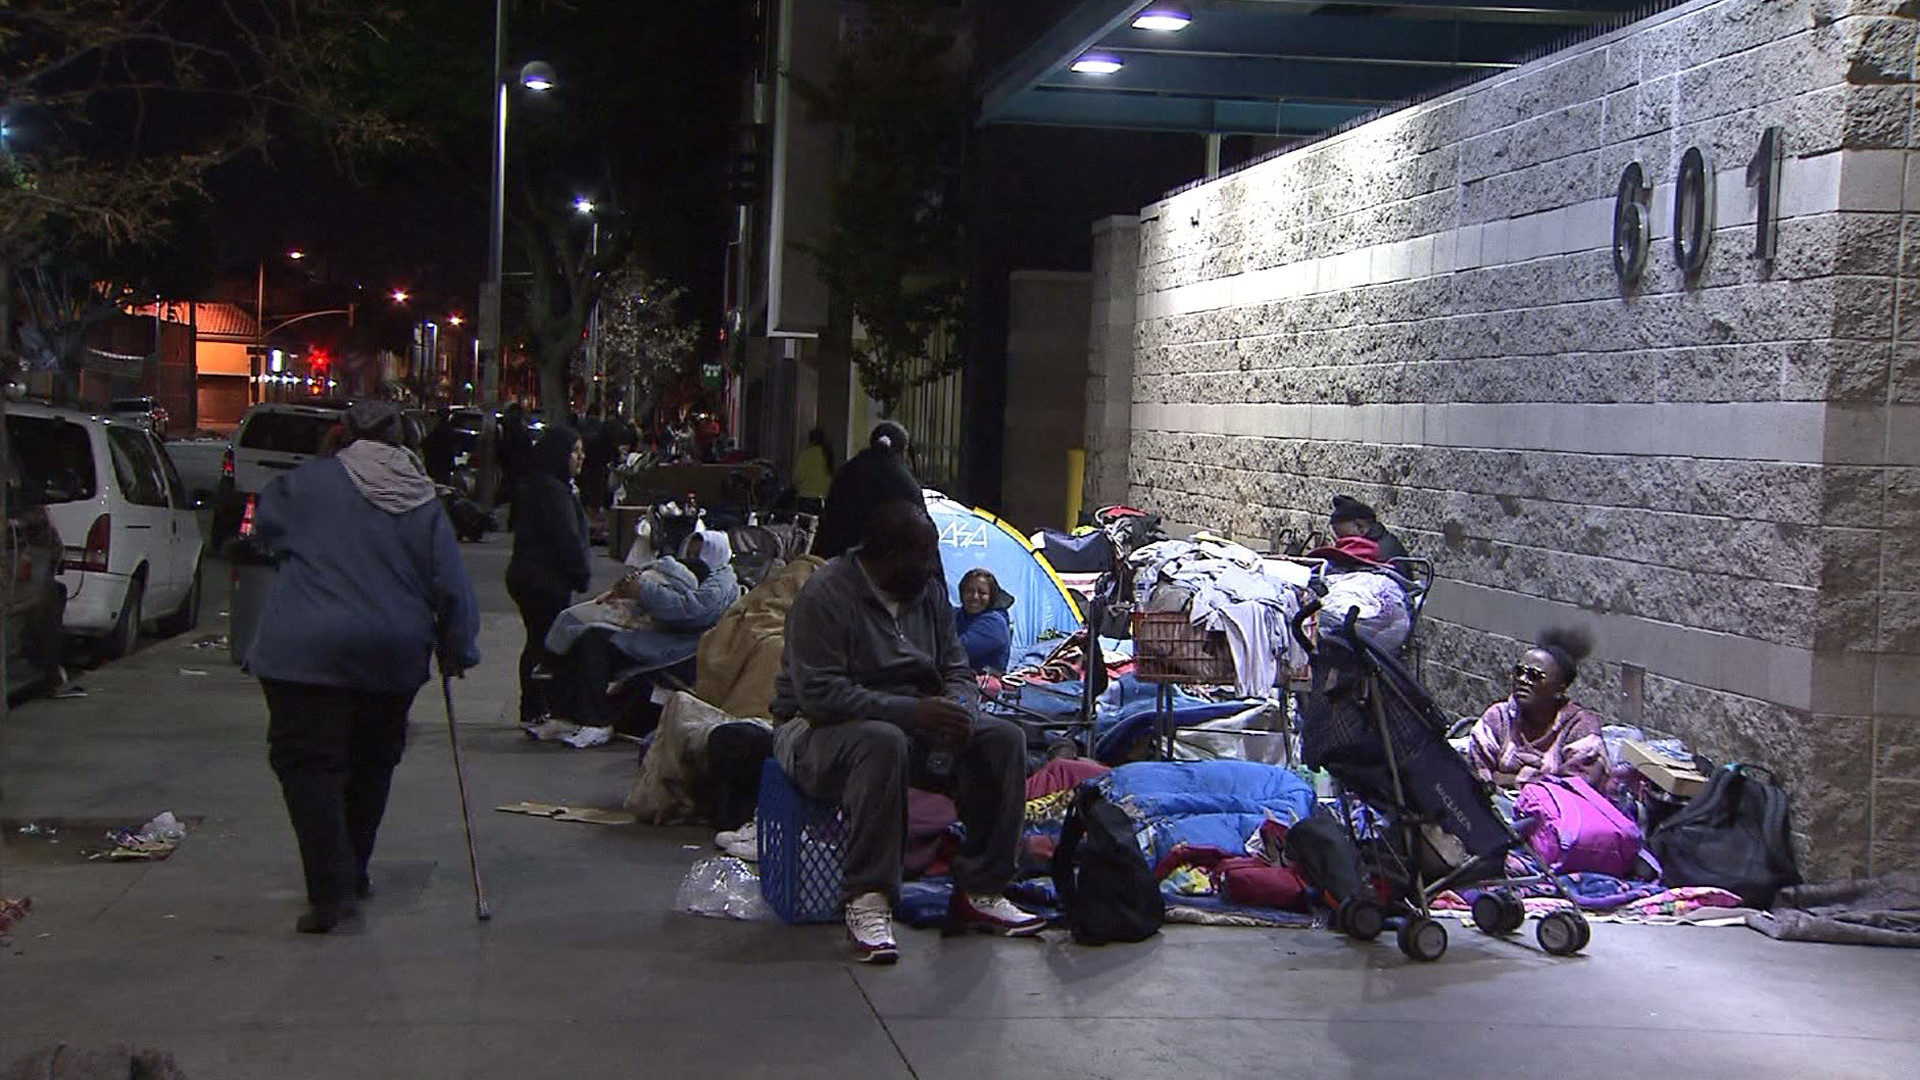 1920x1080 Skid Row Mission Feeds Needy on Christmas Amid Spike in Meals Served